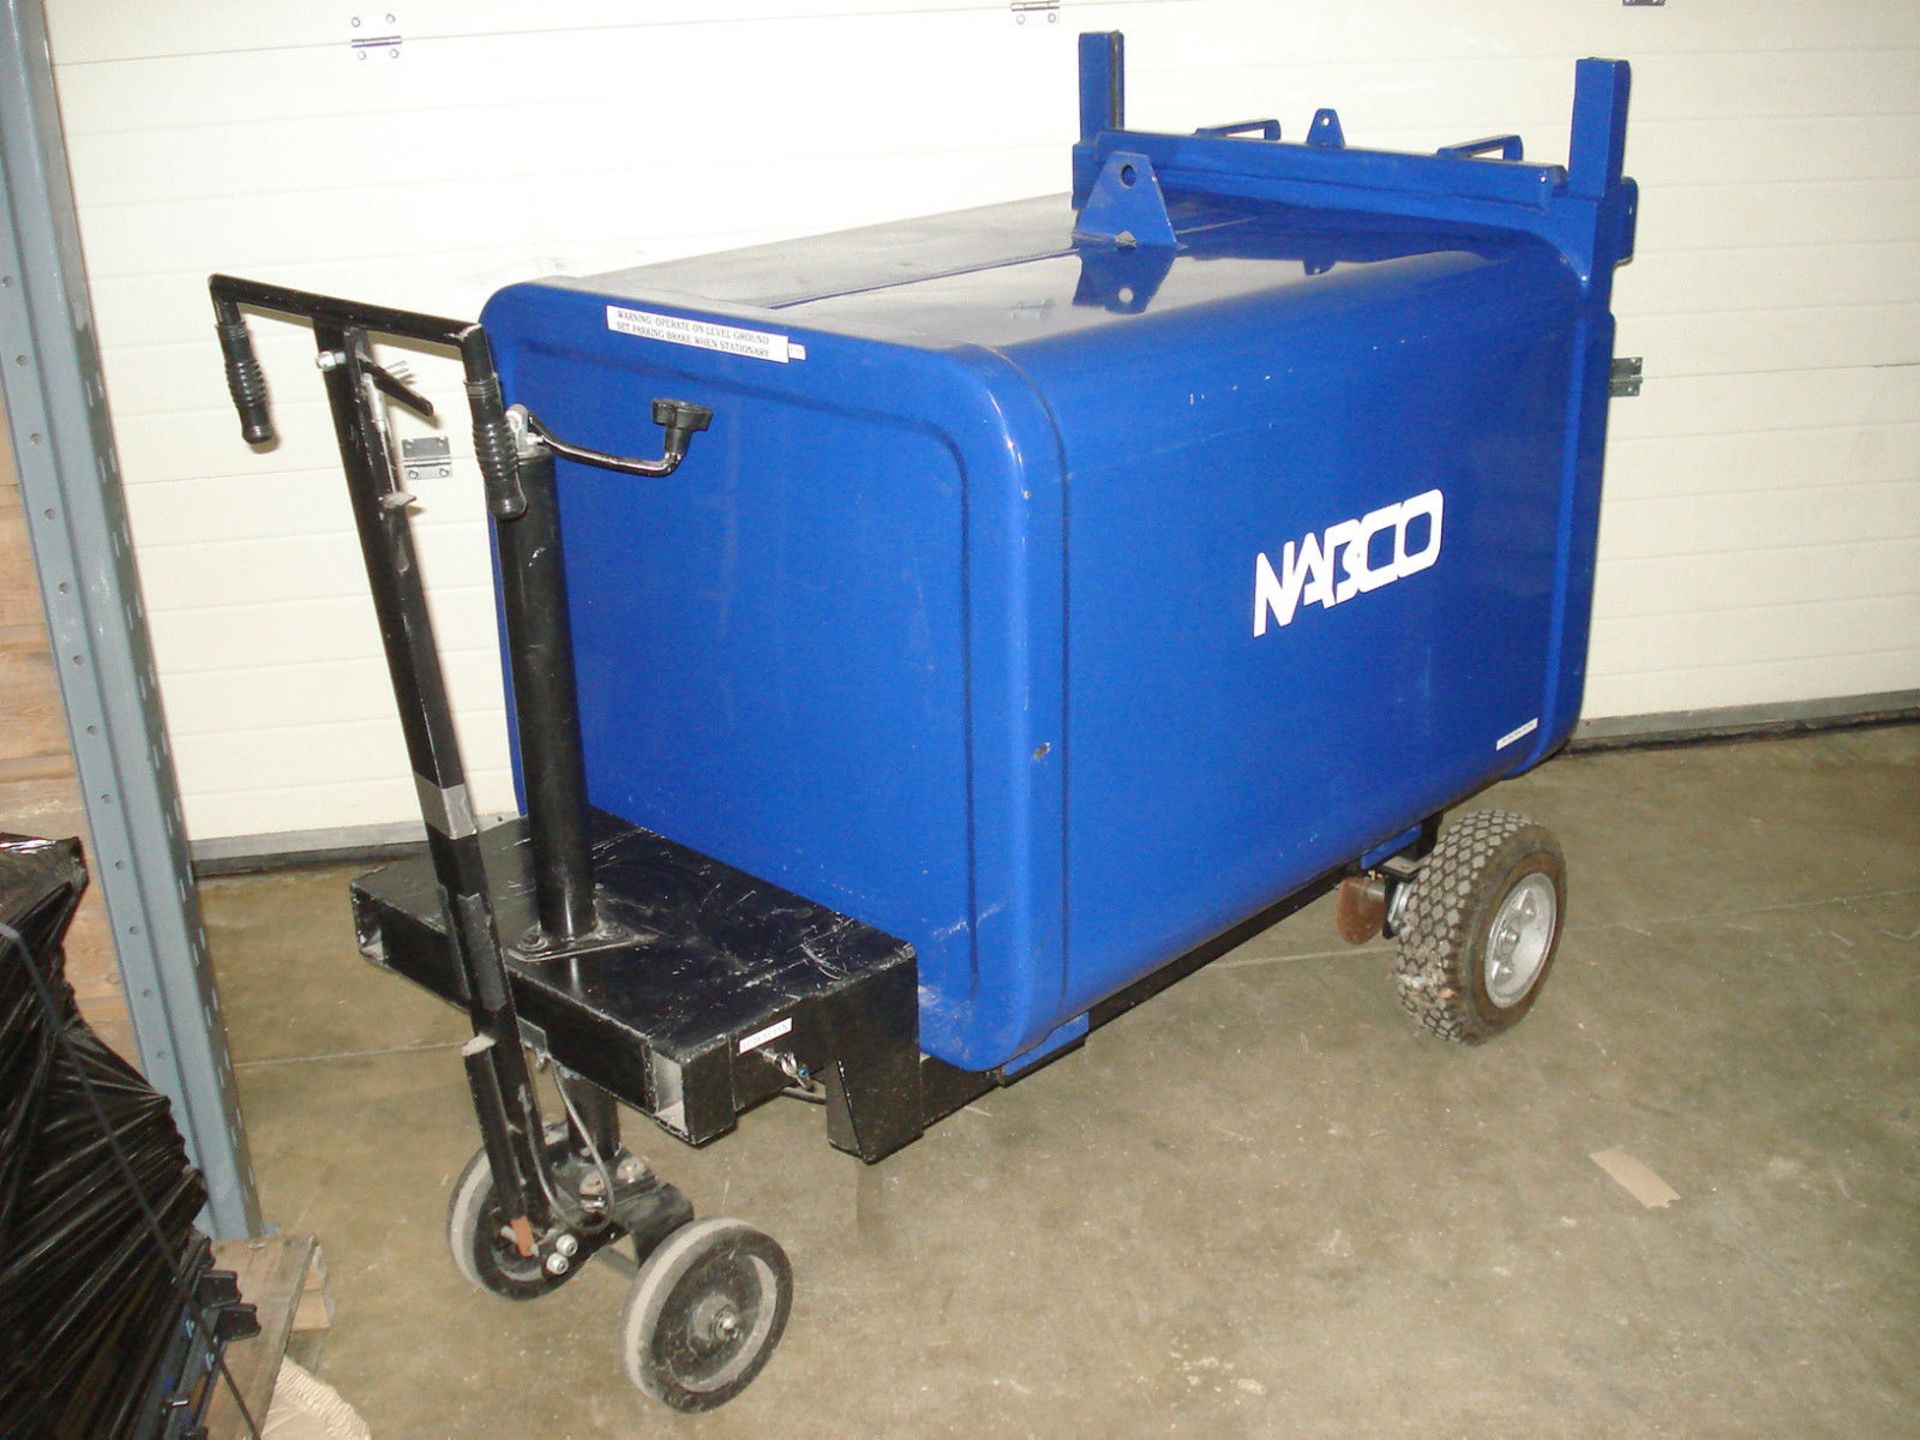 Nabco Suspect Luggage and Parcel Containment Vessel - Will take a parcel 24" wide by 32" long and